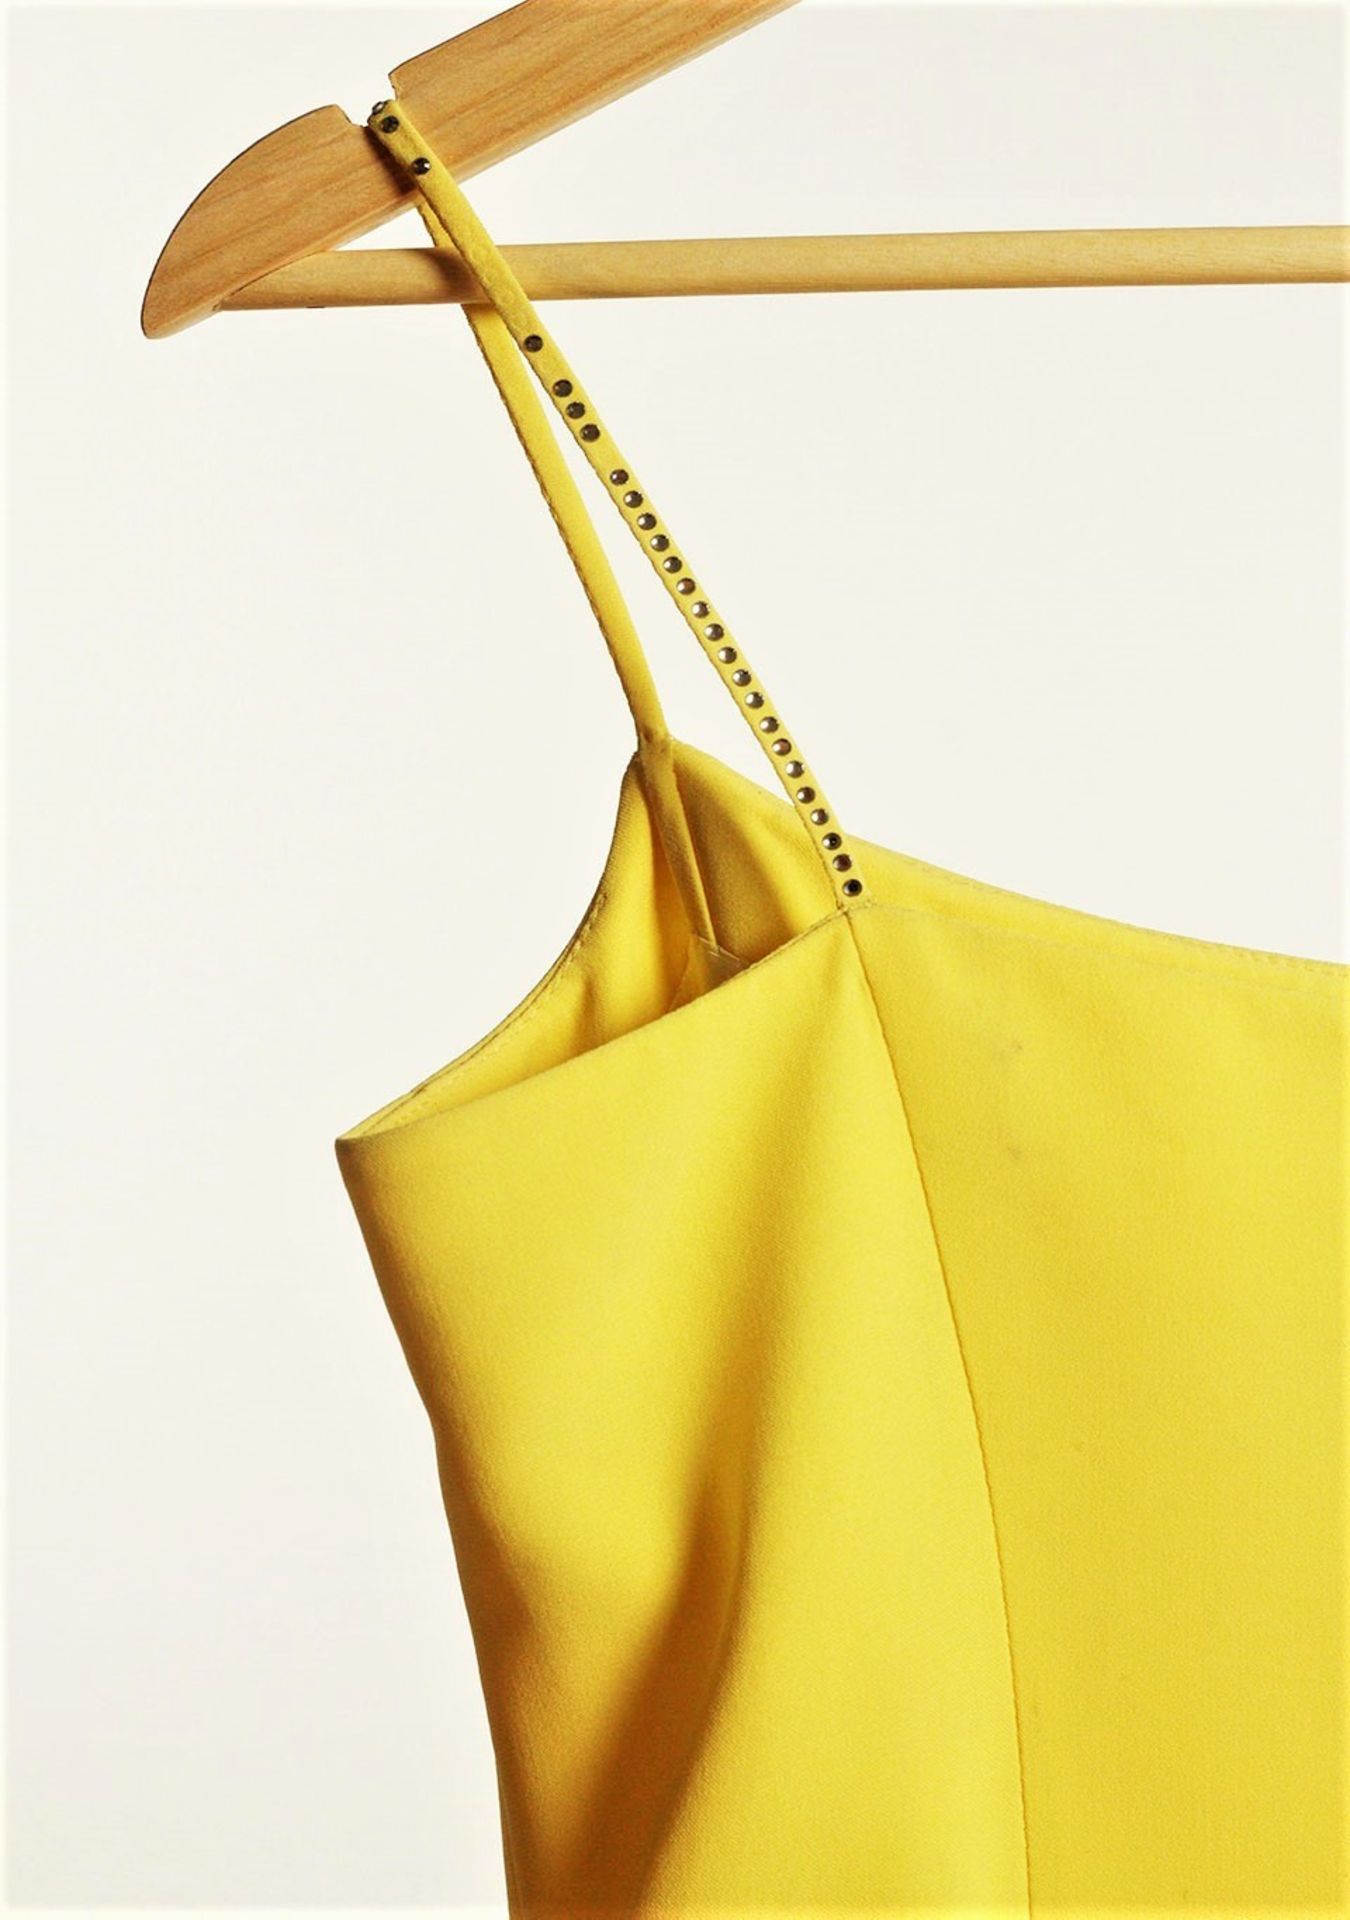 1 x Boutique Le Duc Yellow Dress - Size: 12 - Material: 68% Acetate, 32% Viscose - From a High End - Image 11 of 14